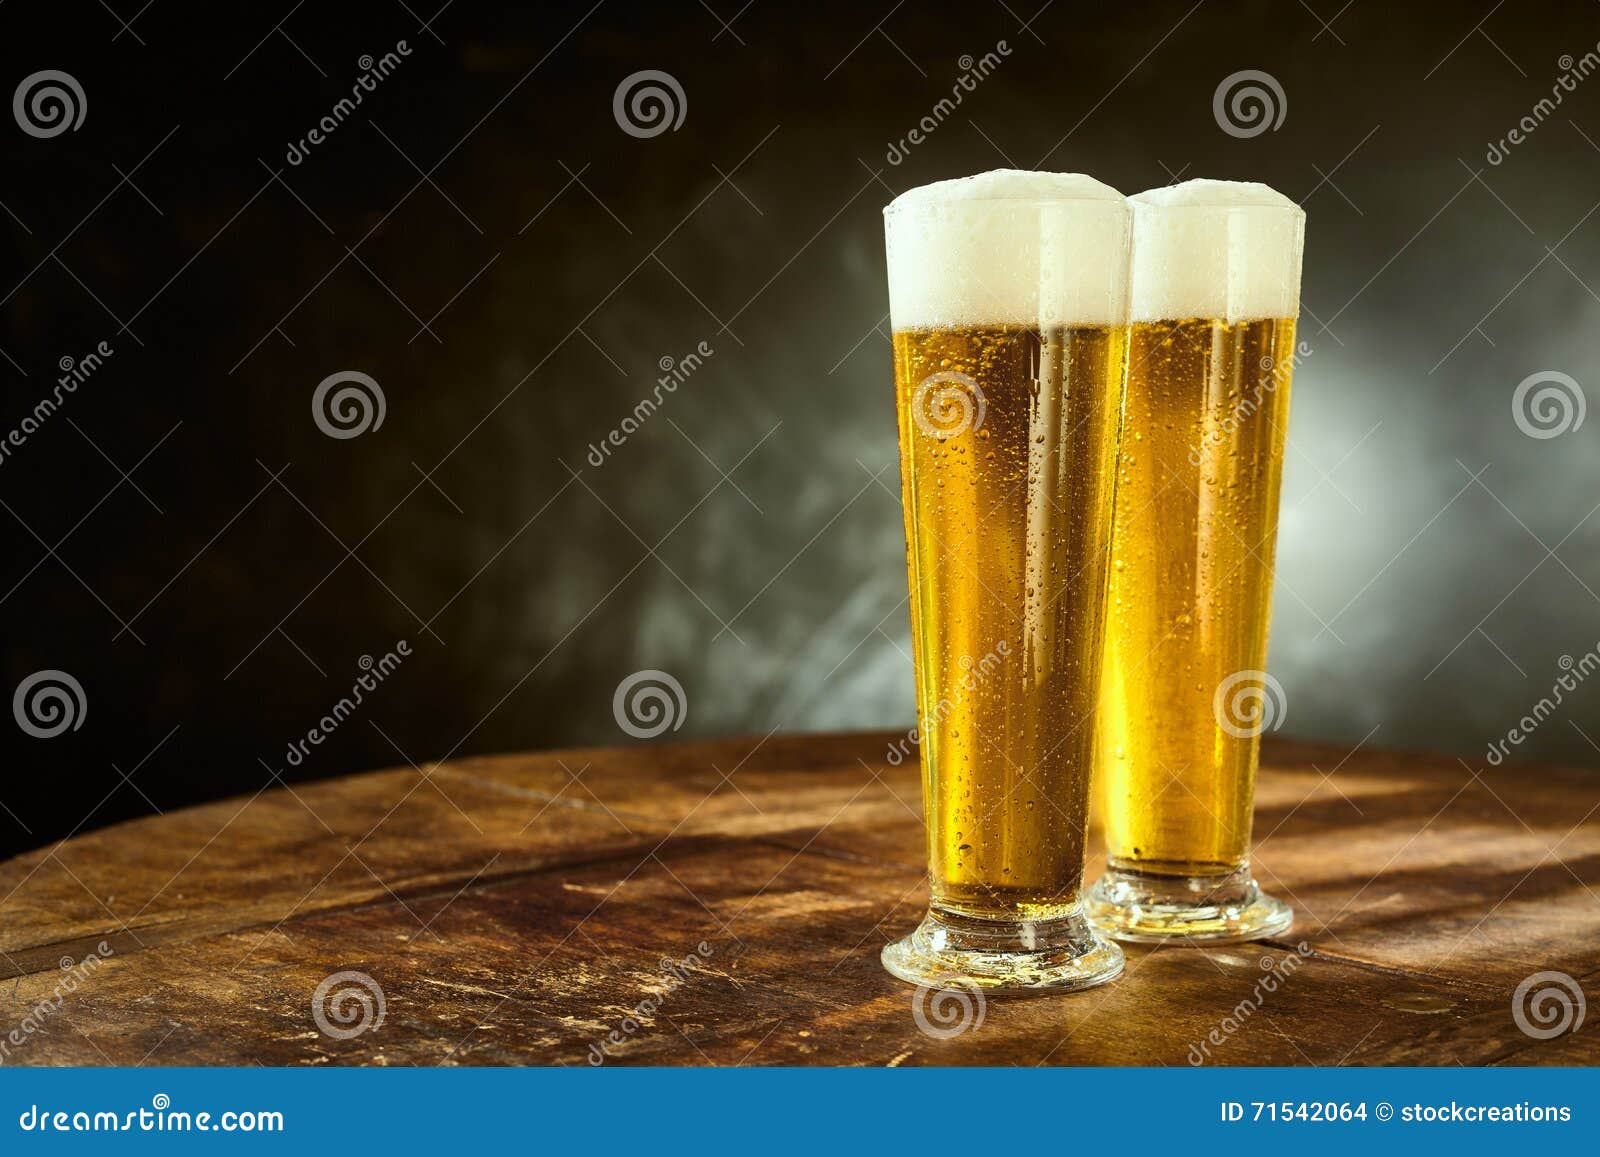 two ice cold frothy beers in elegant long glasses